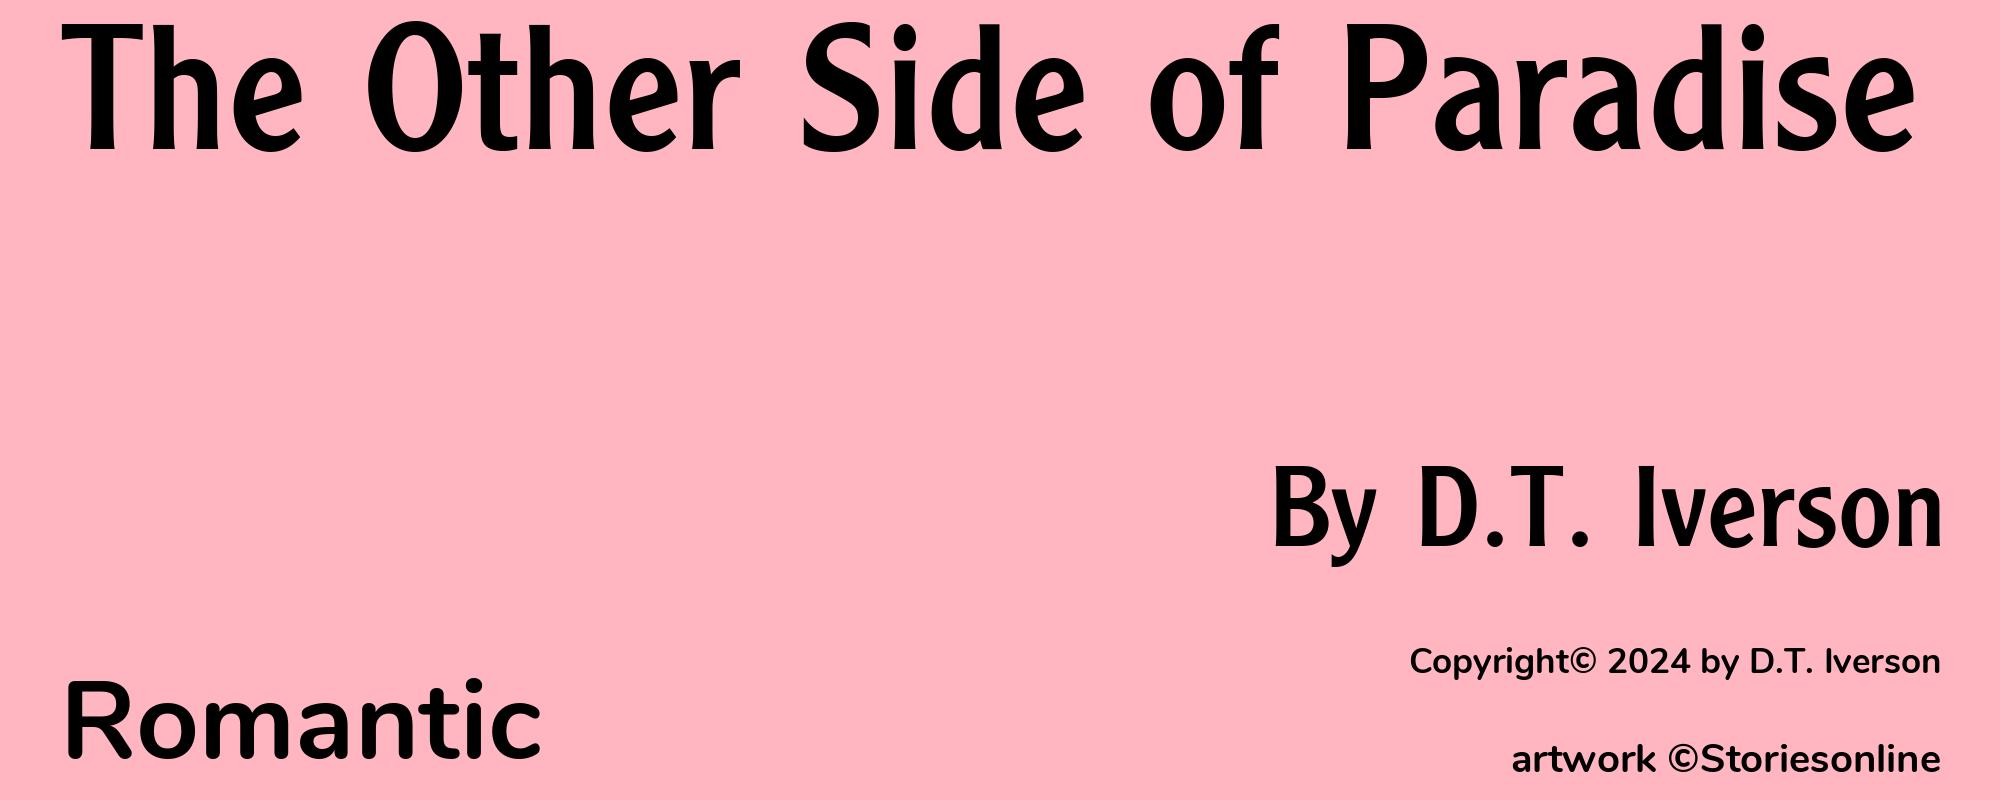 The Other Side of Paradise - Cover